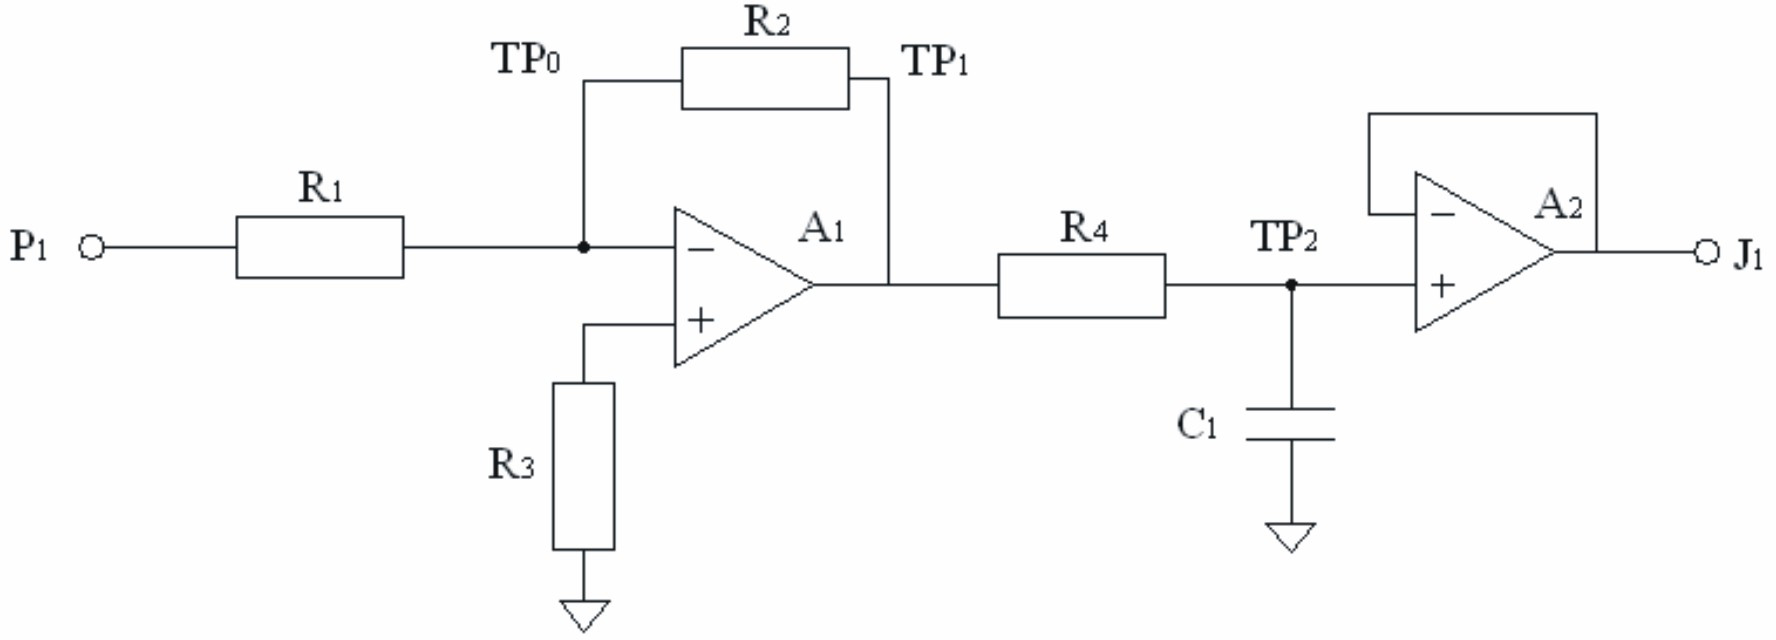 Fault removal method for multi-signal flow graph